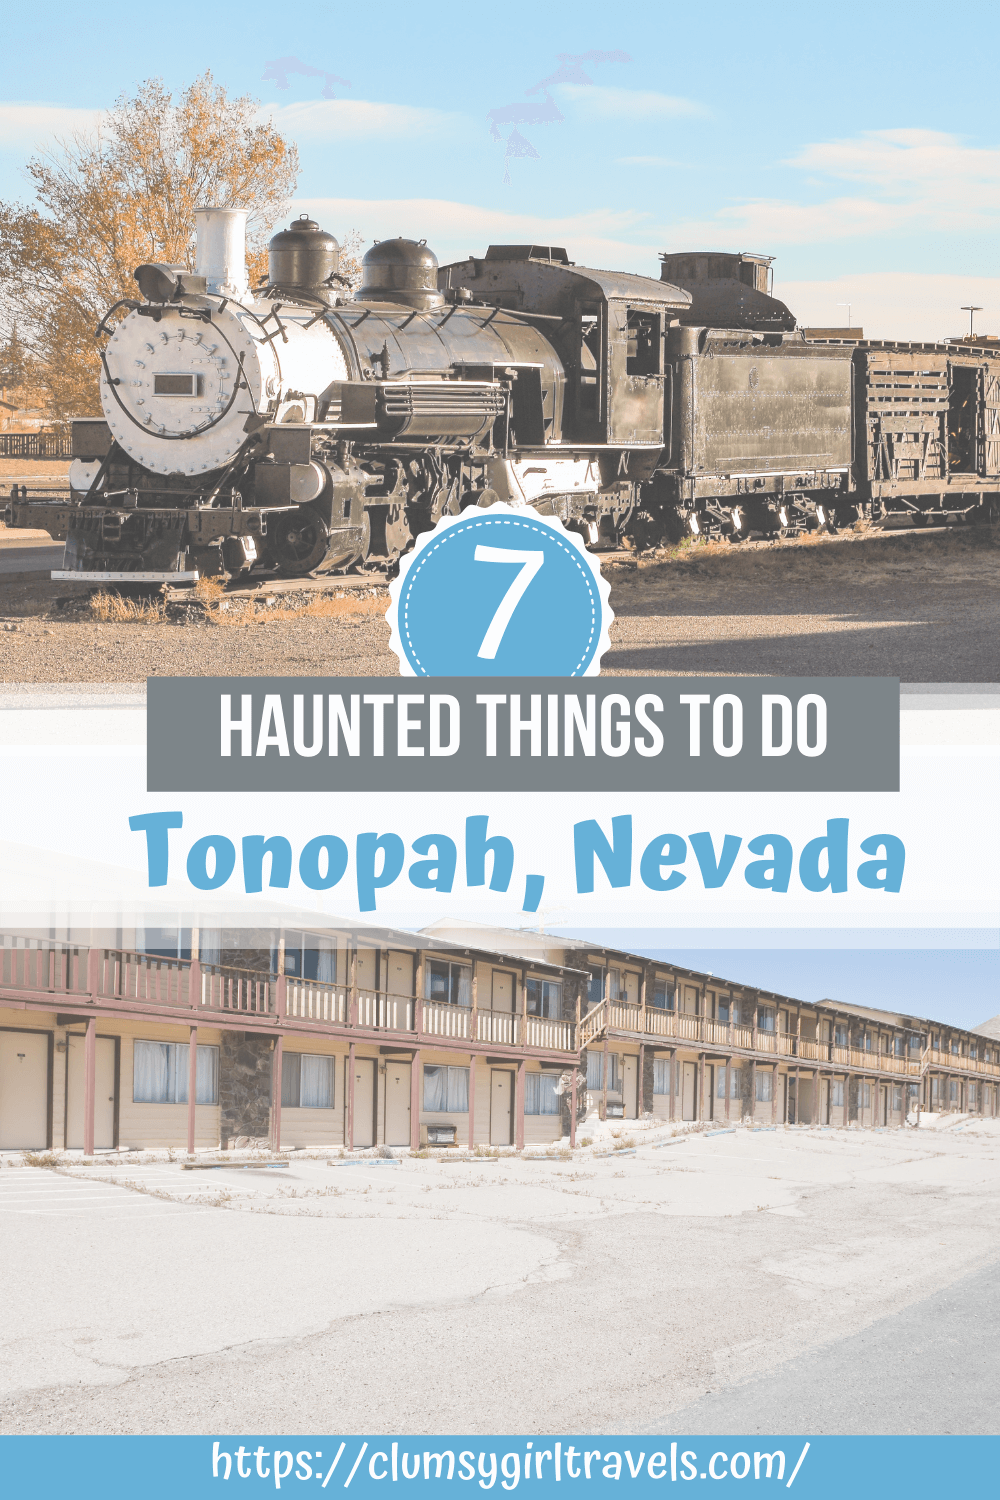 Are you looking for the best things to do in Tonopah? This guide will show you the amazing things to do in Tonopah